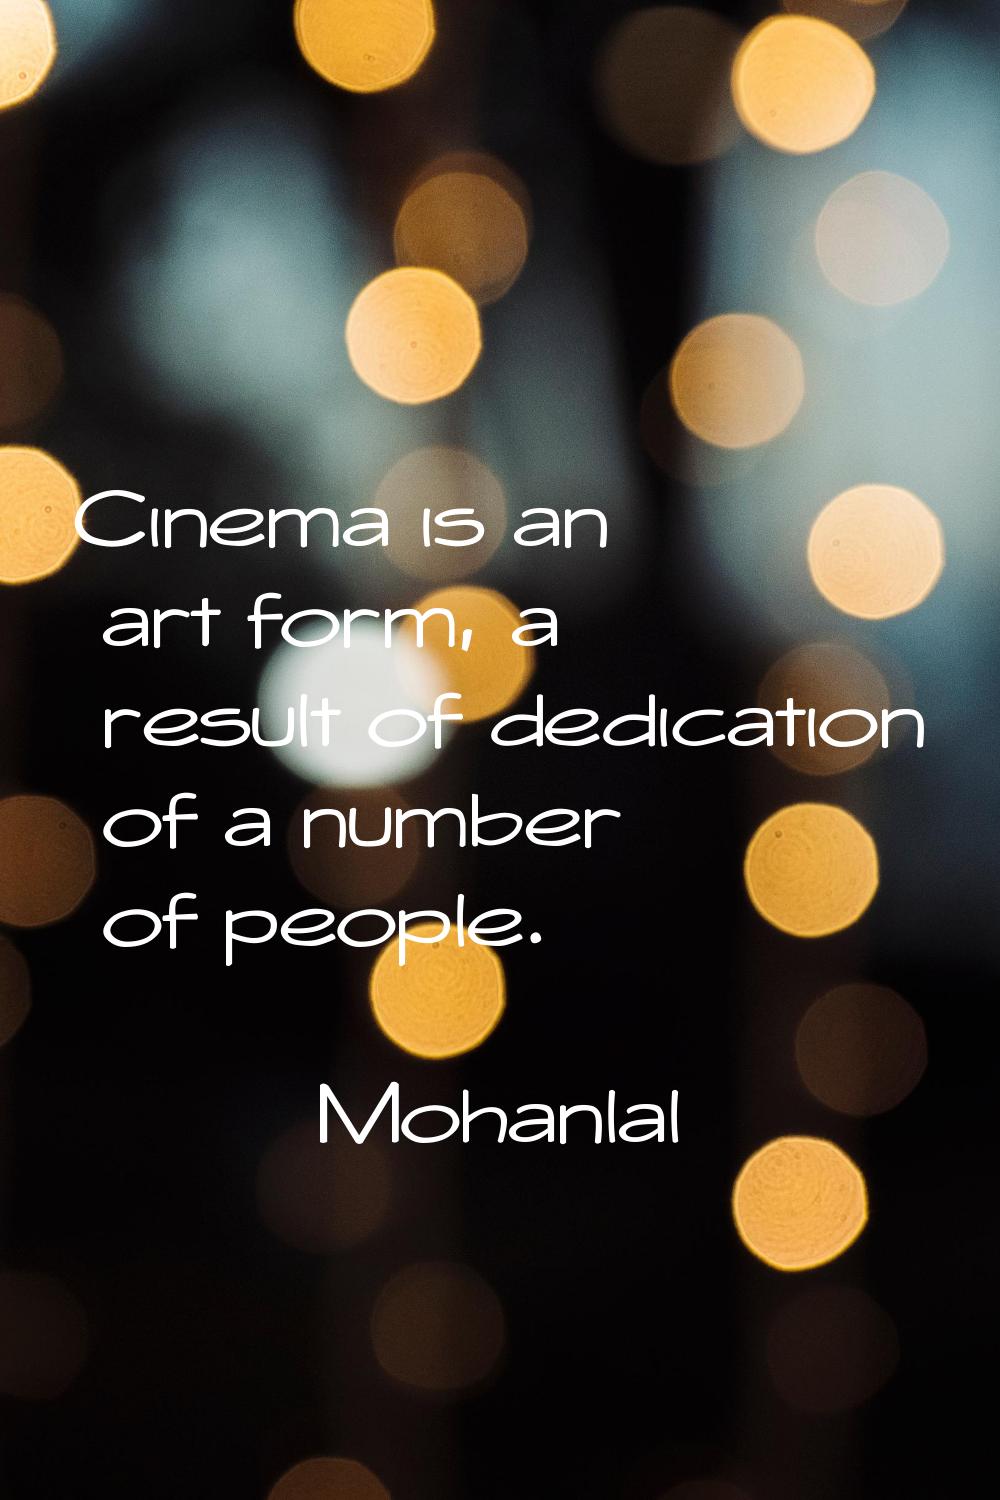 Cinema is an art form, a result of dedication of a number of people.